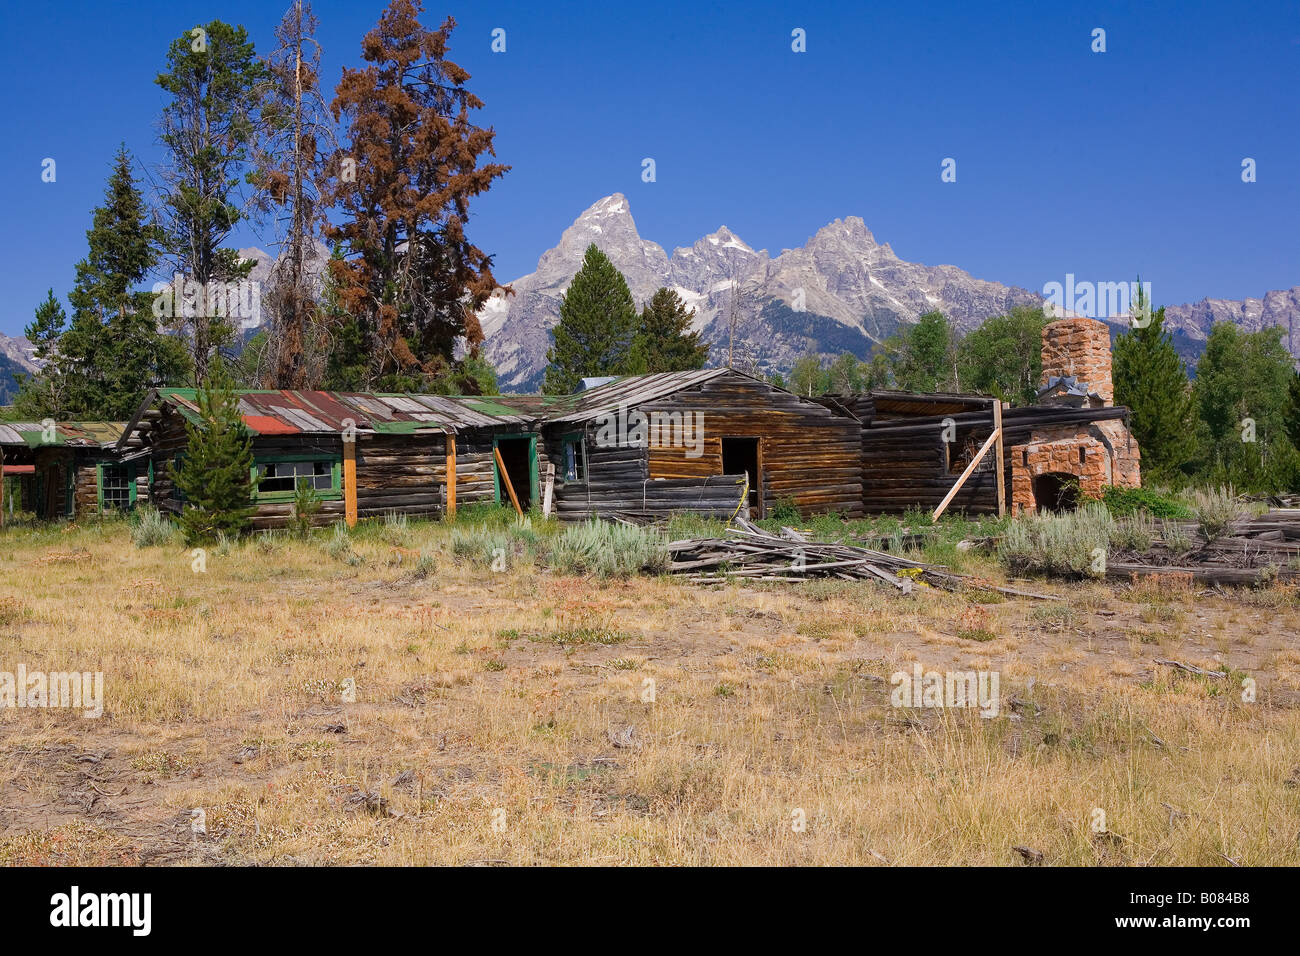 Image of an abandoned ranch house in disrepair with piles of old lumber and damaged roofing materials laying about Stock Photo